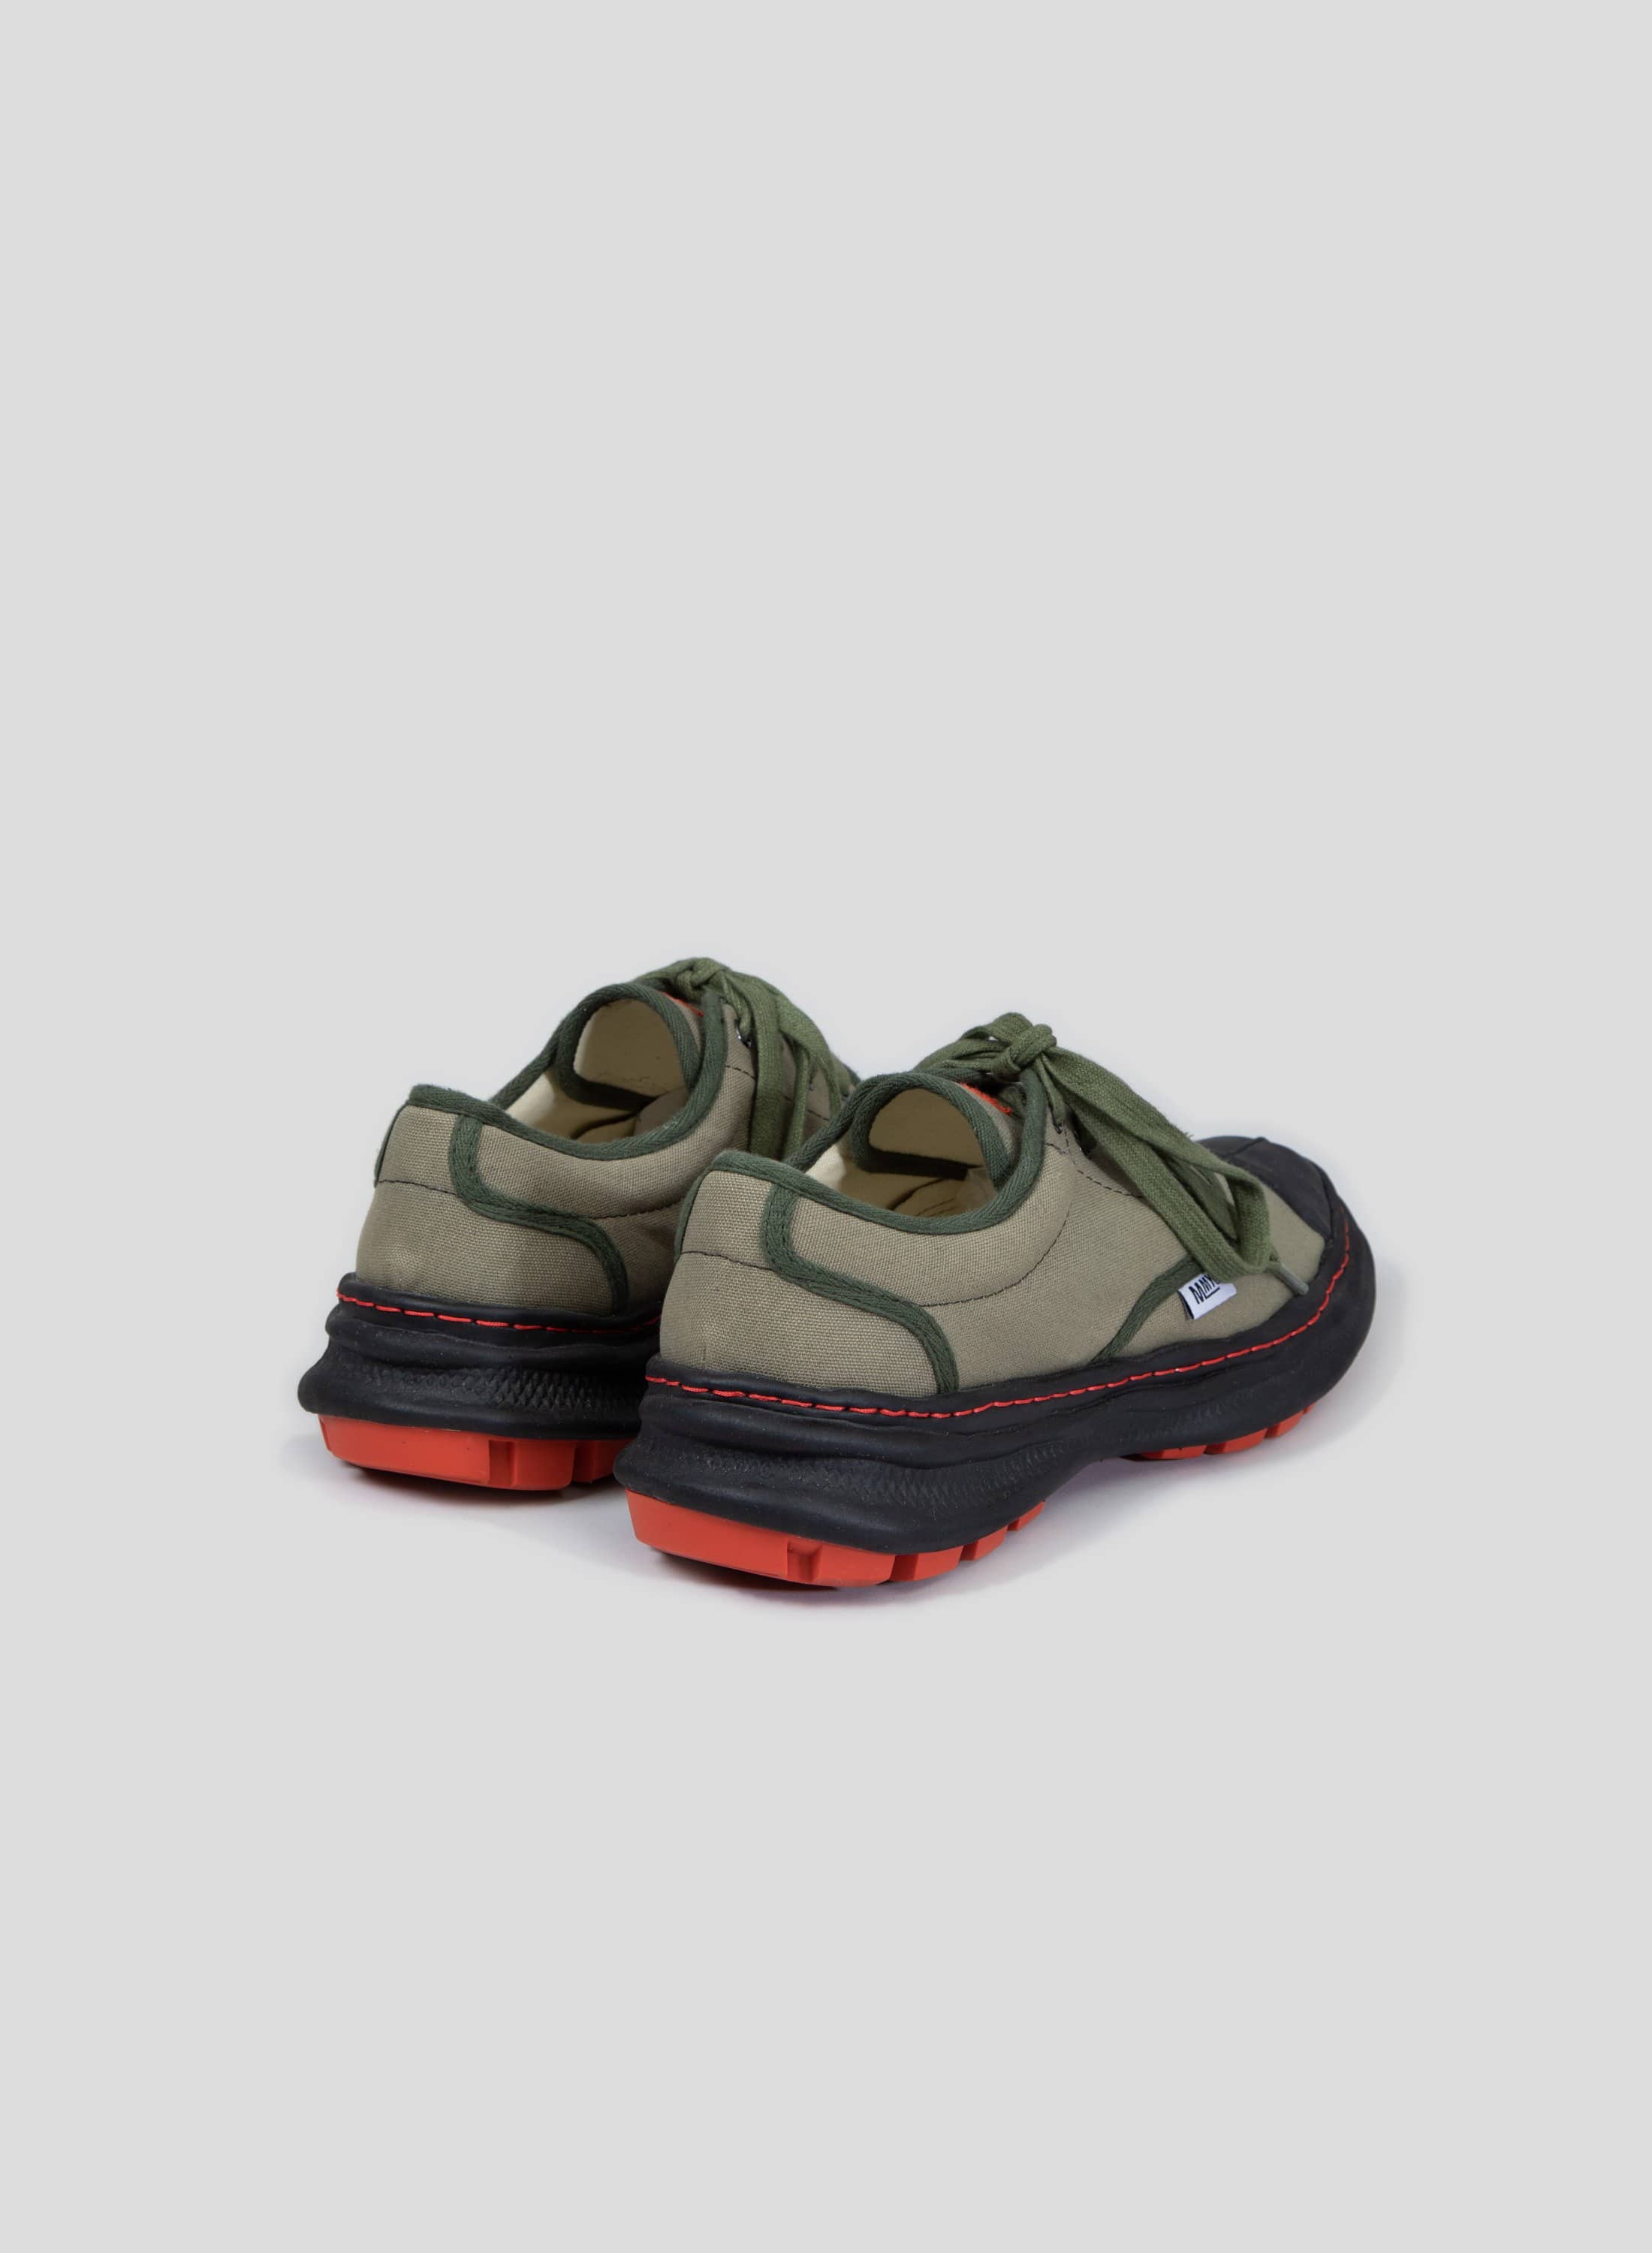 nigel cabourn military shoes